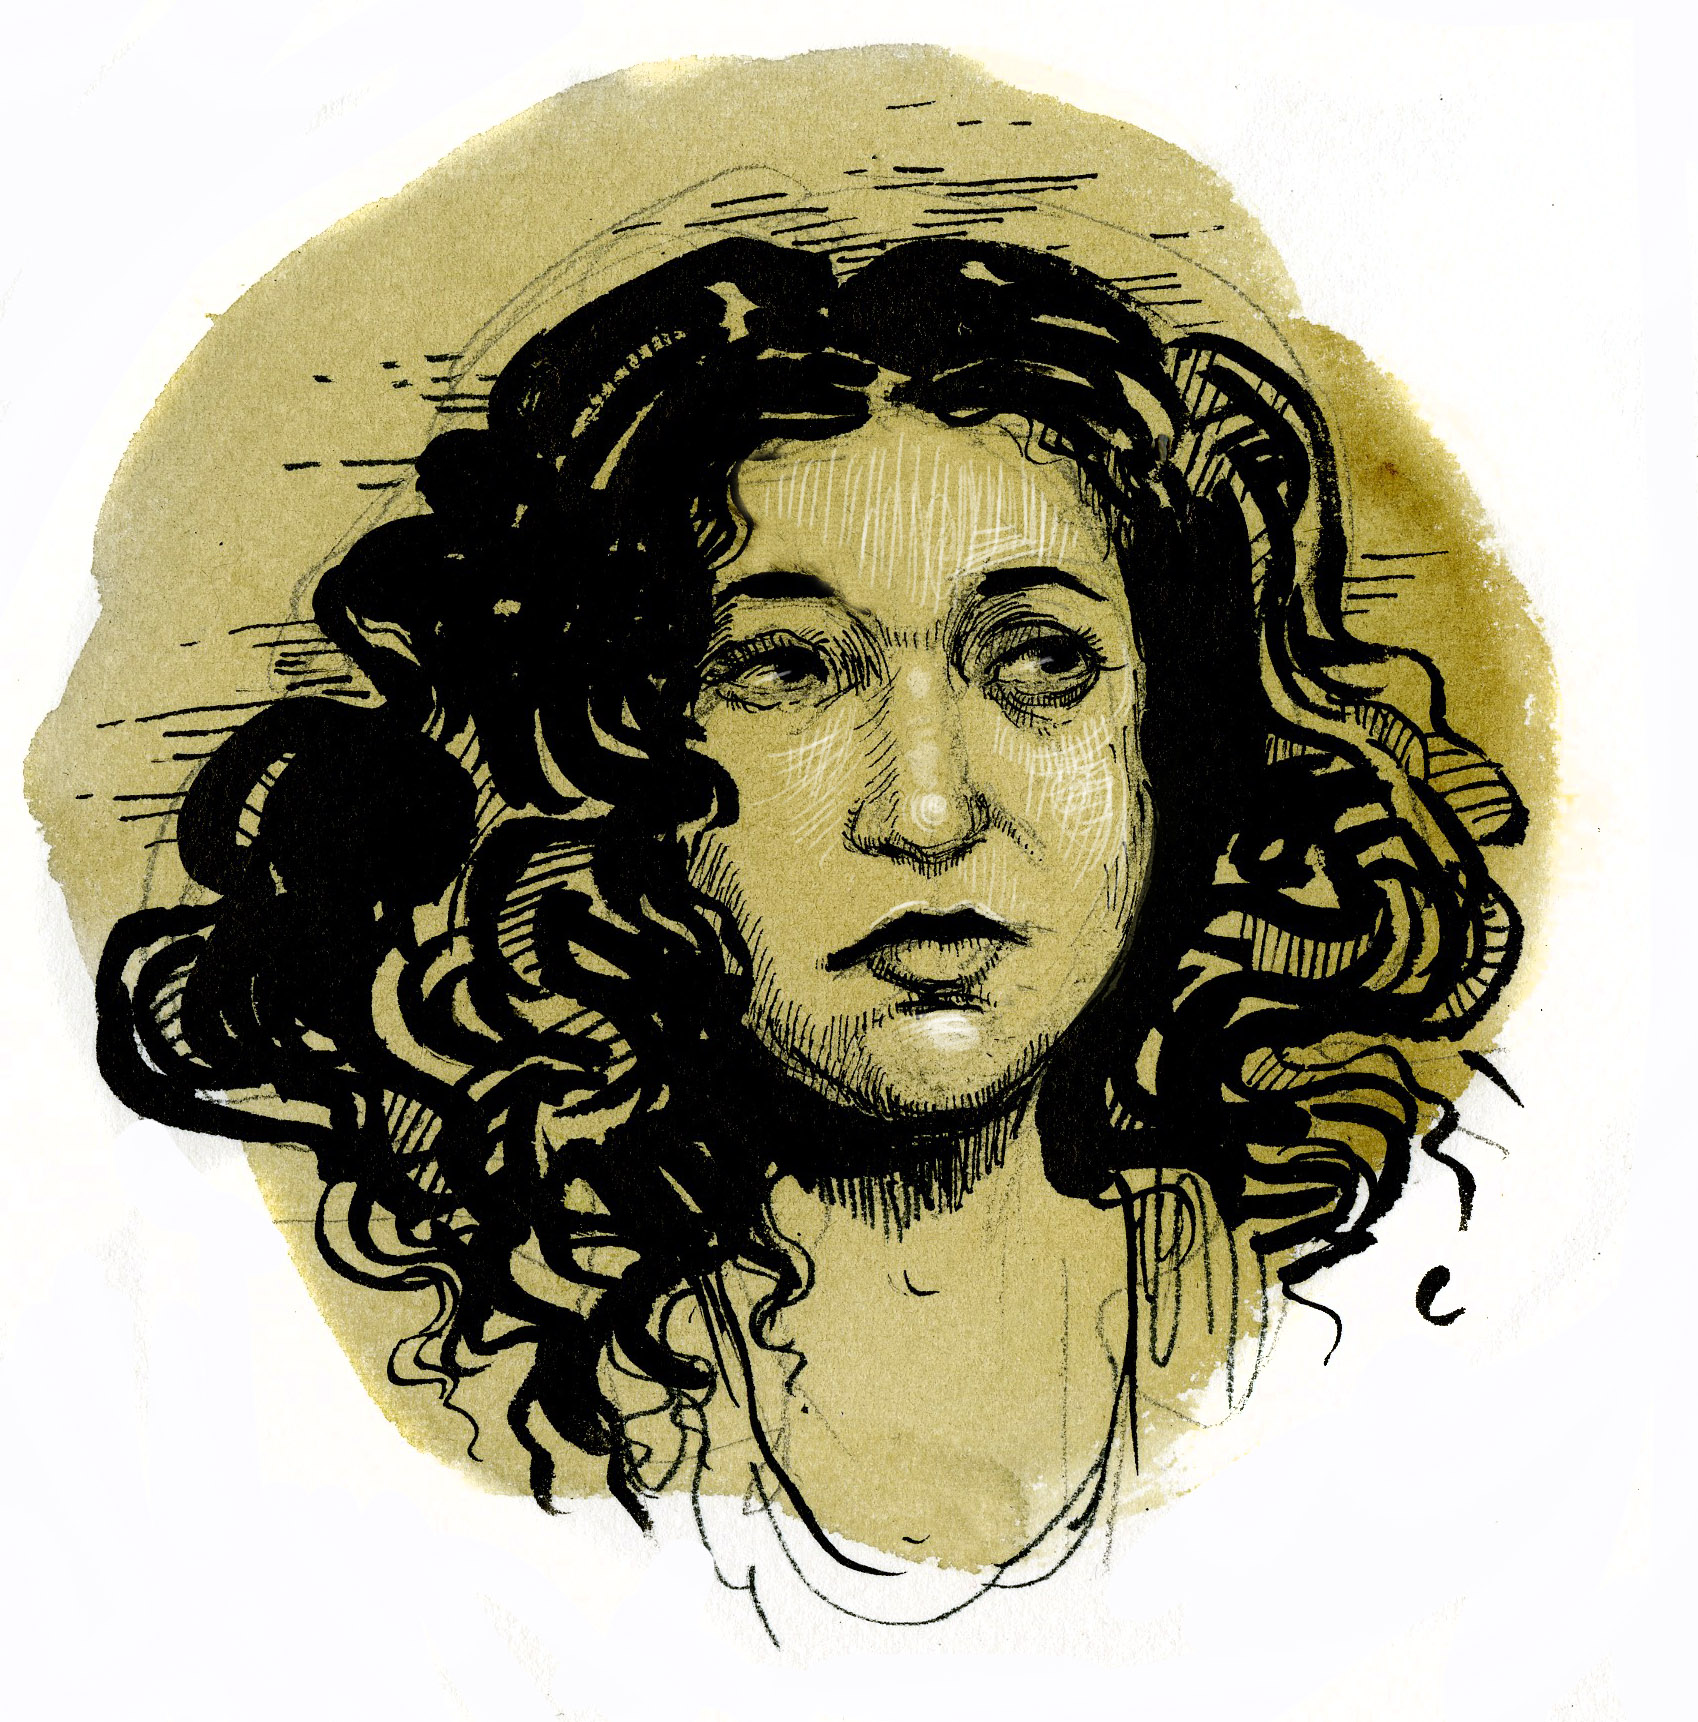 Free Cecily McMillan! A Special Issue of the Occupy Gazette